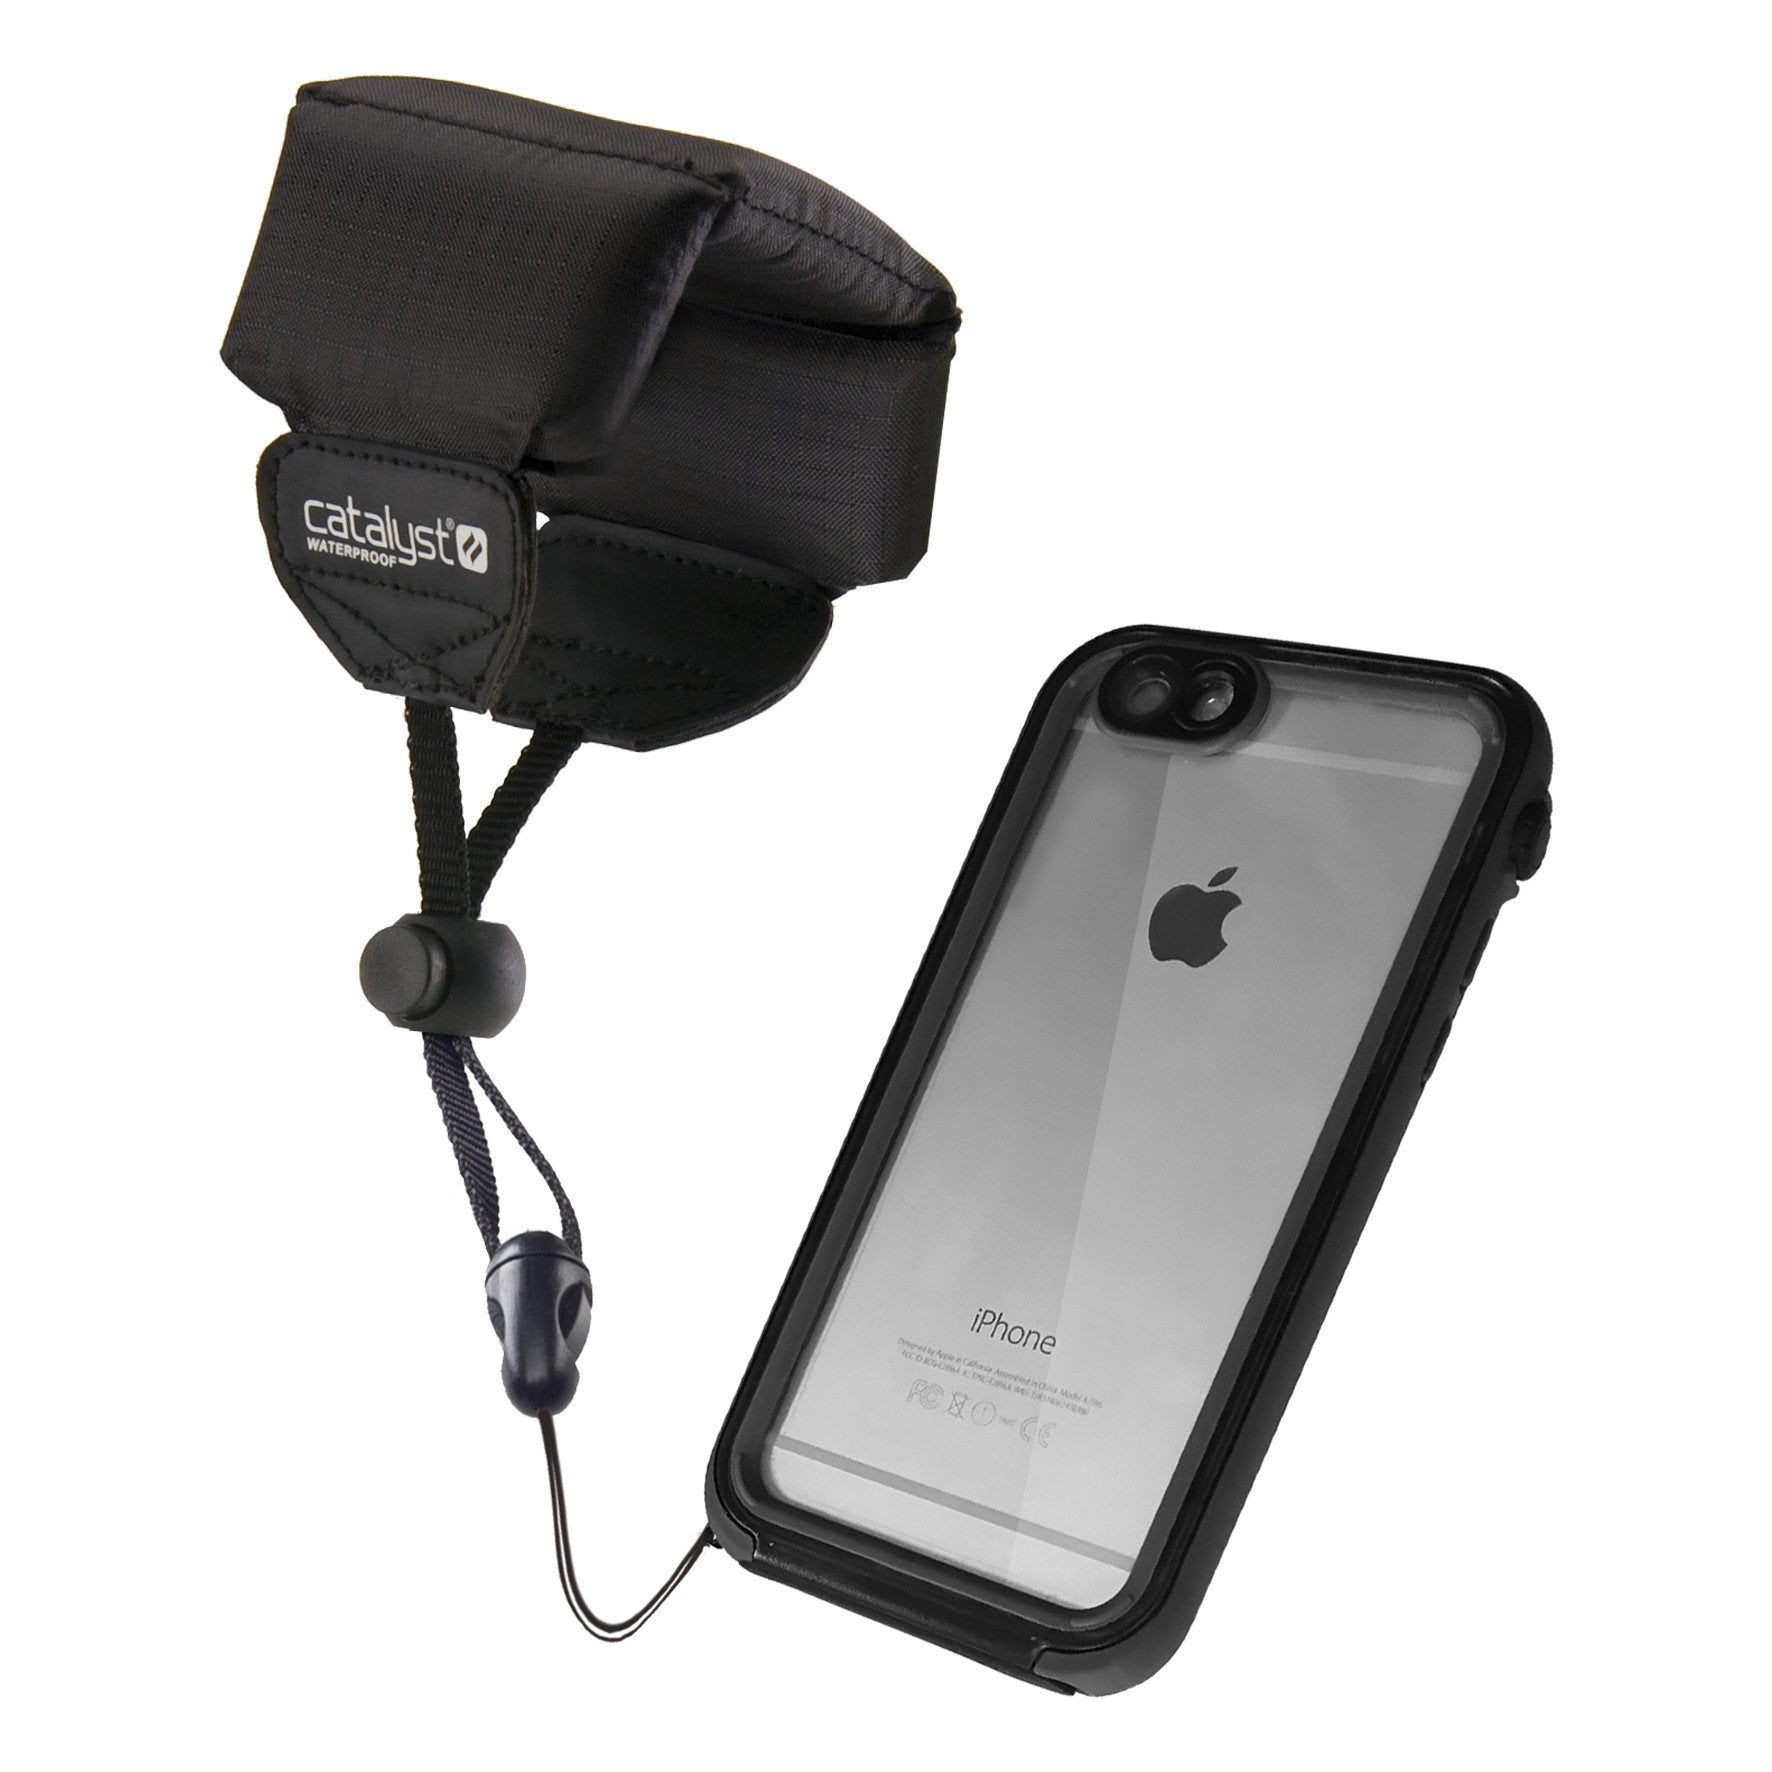 Floating Lanyard for Catalyst iPhone Case - Stealth Black